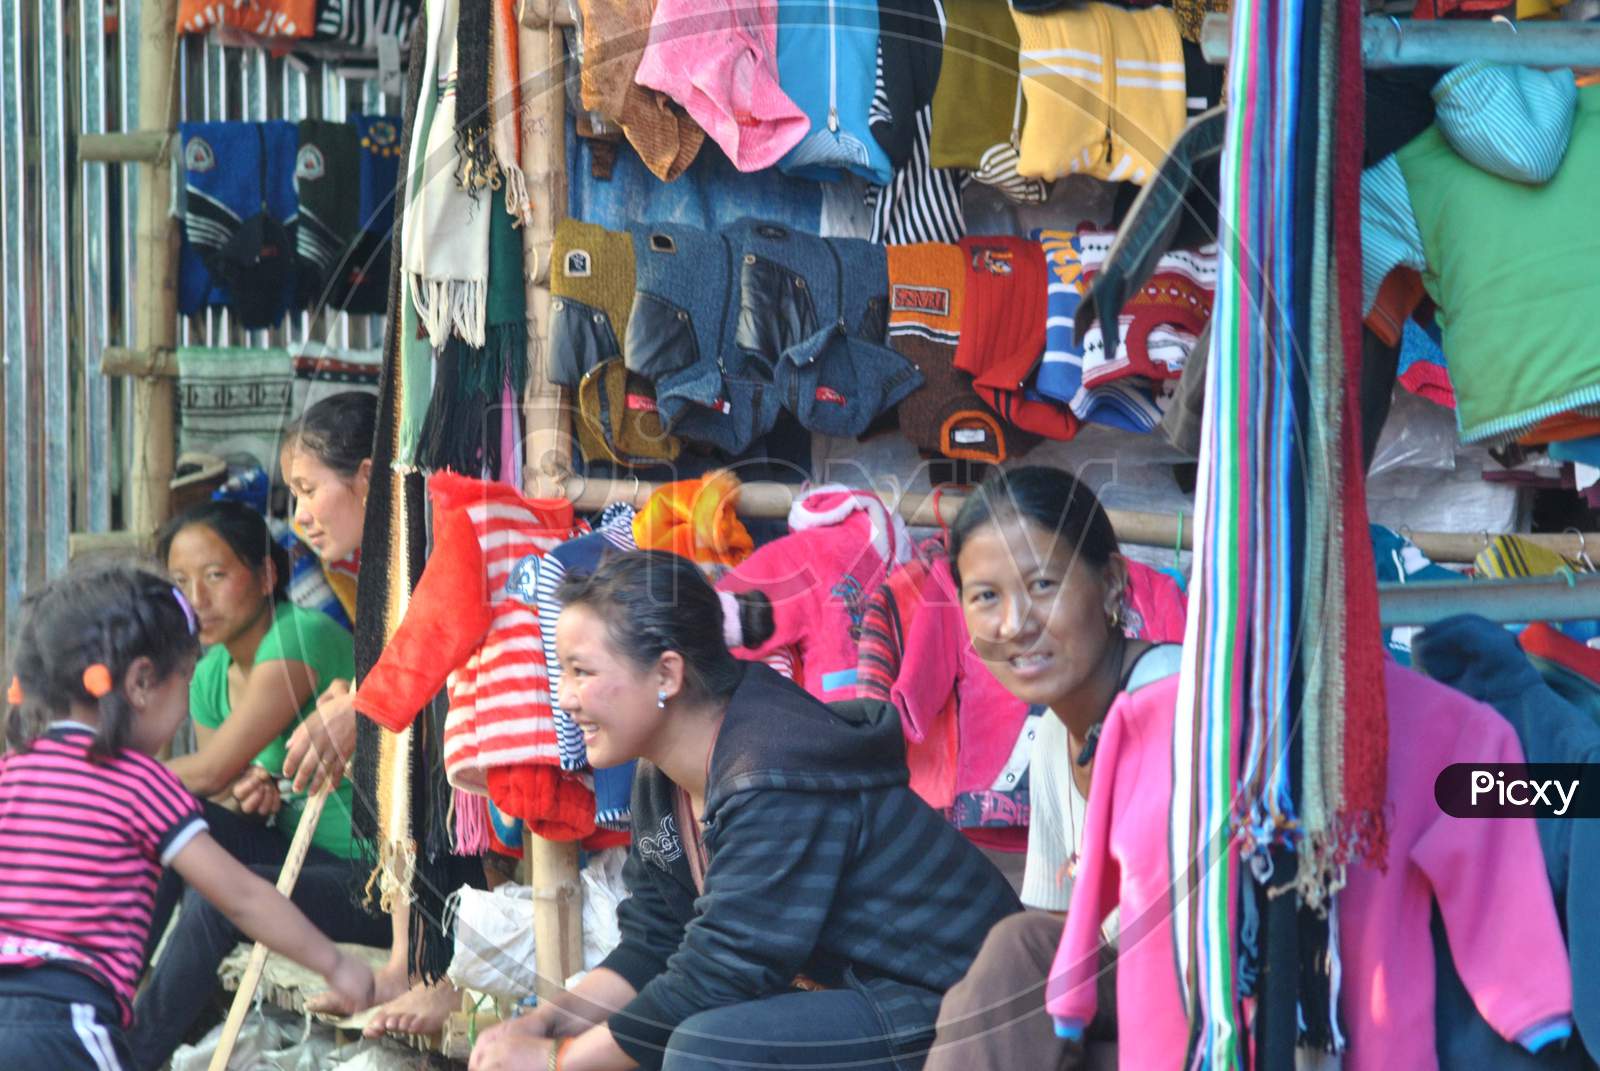 Sweaters Or woolen Clothes  Selling in Shops In Assam